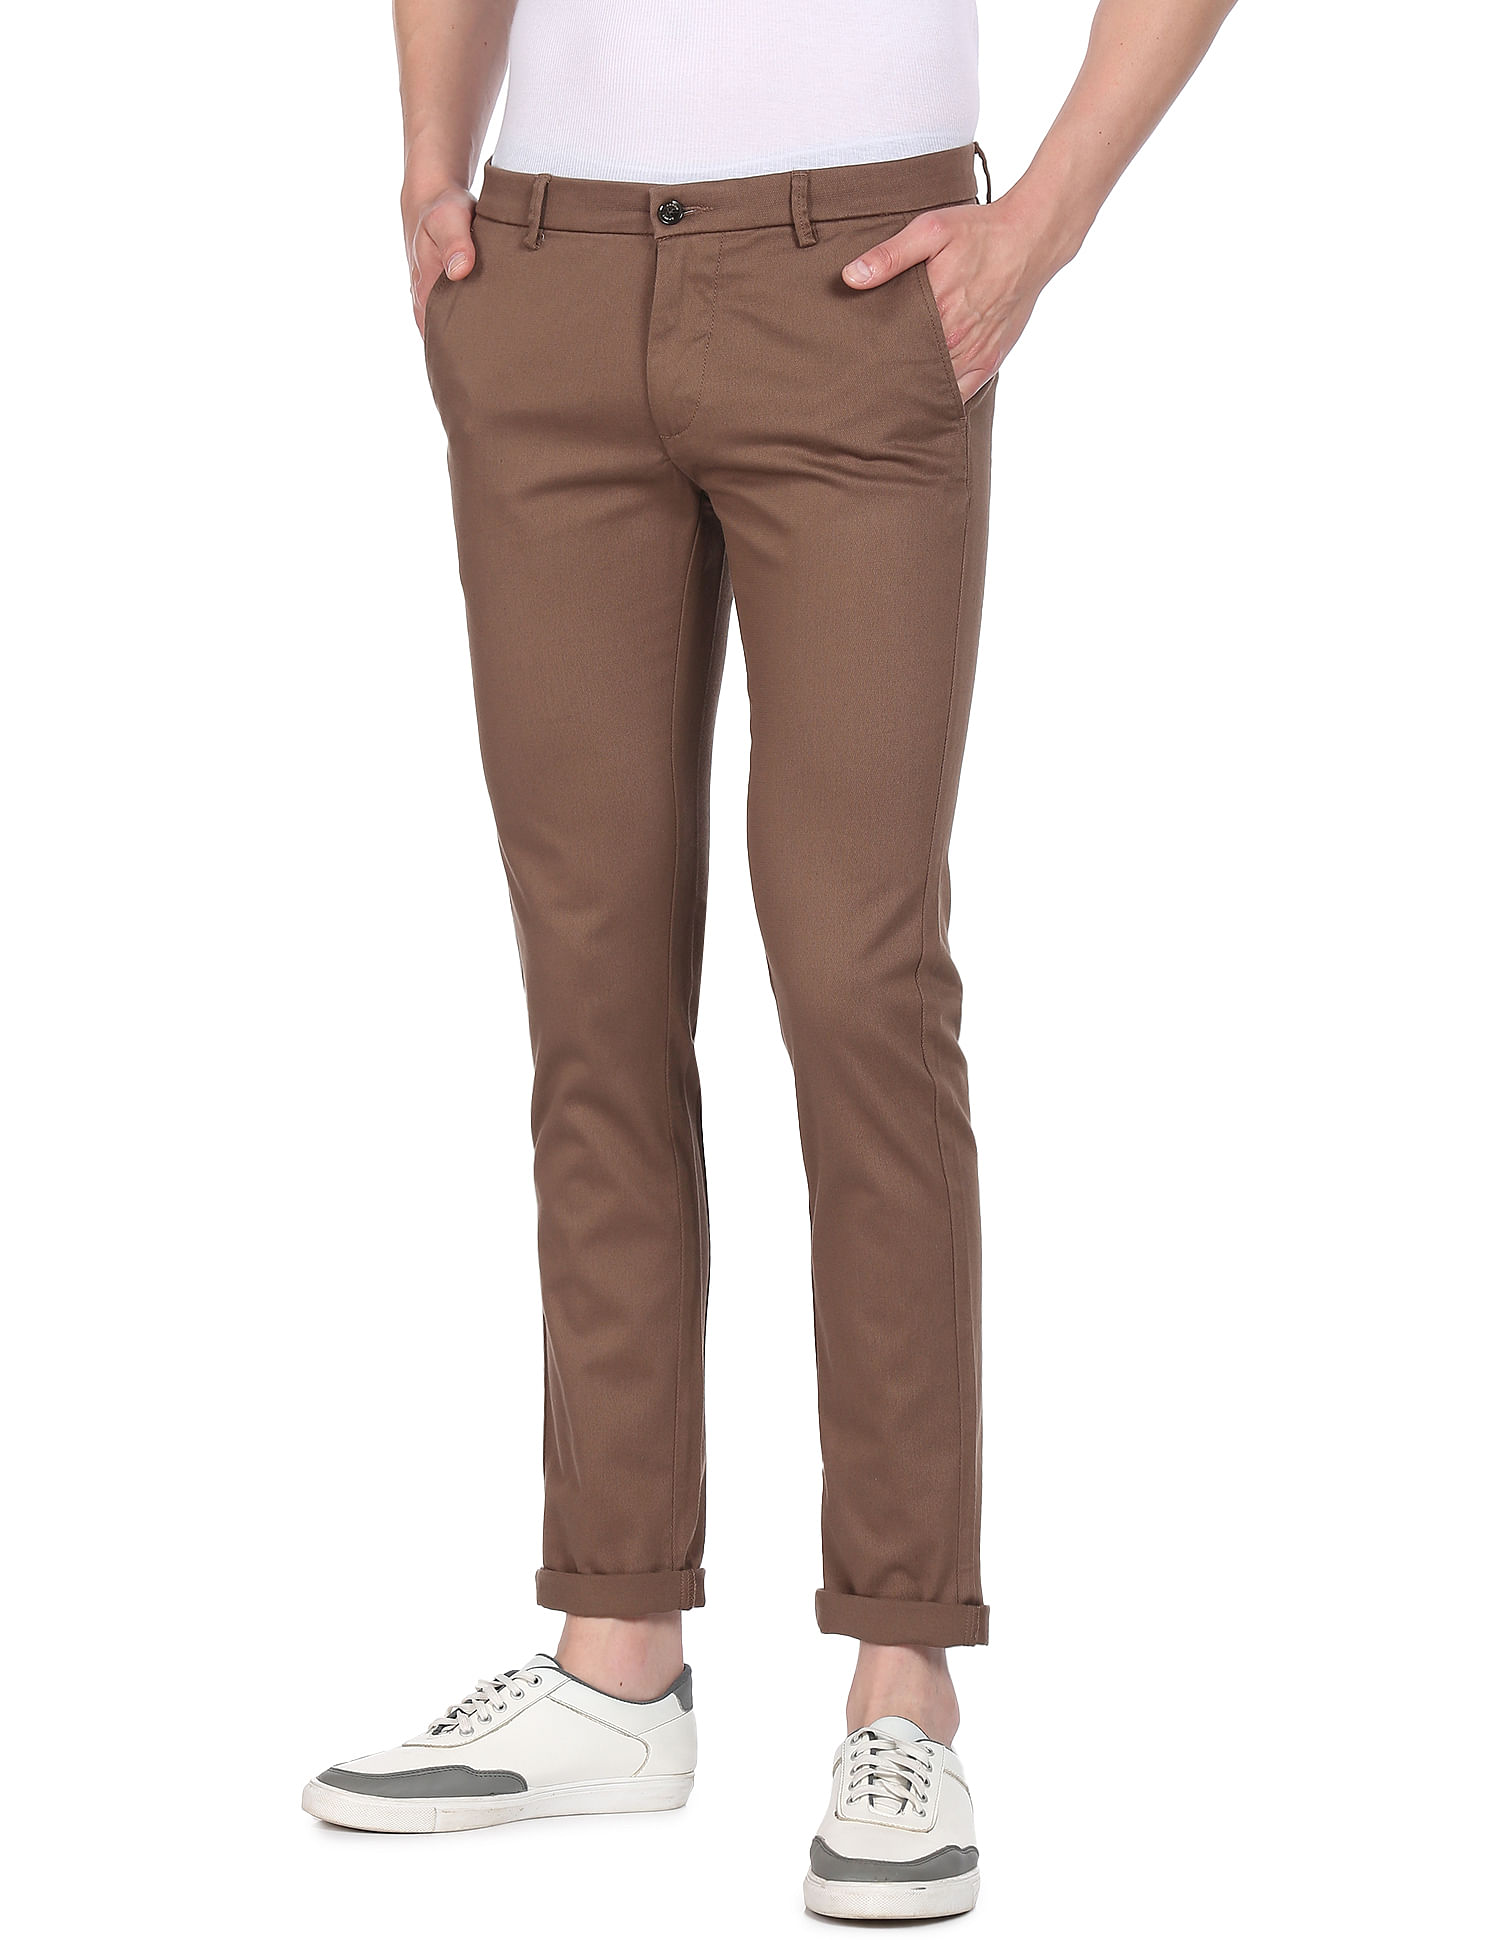 U.S. POLO ASSN. Slim Fit Men Multicolor Trousers - Buy U.S. POLO ASSN. Slim  Fit Men Multicolor Trousers Online at Best Prices in India | Flipkart.com